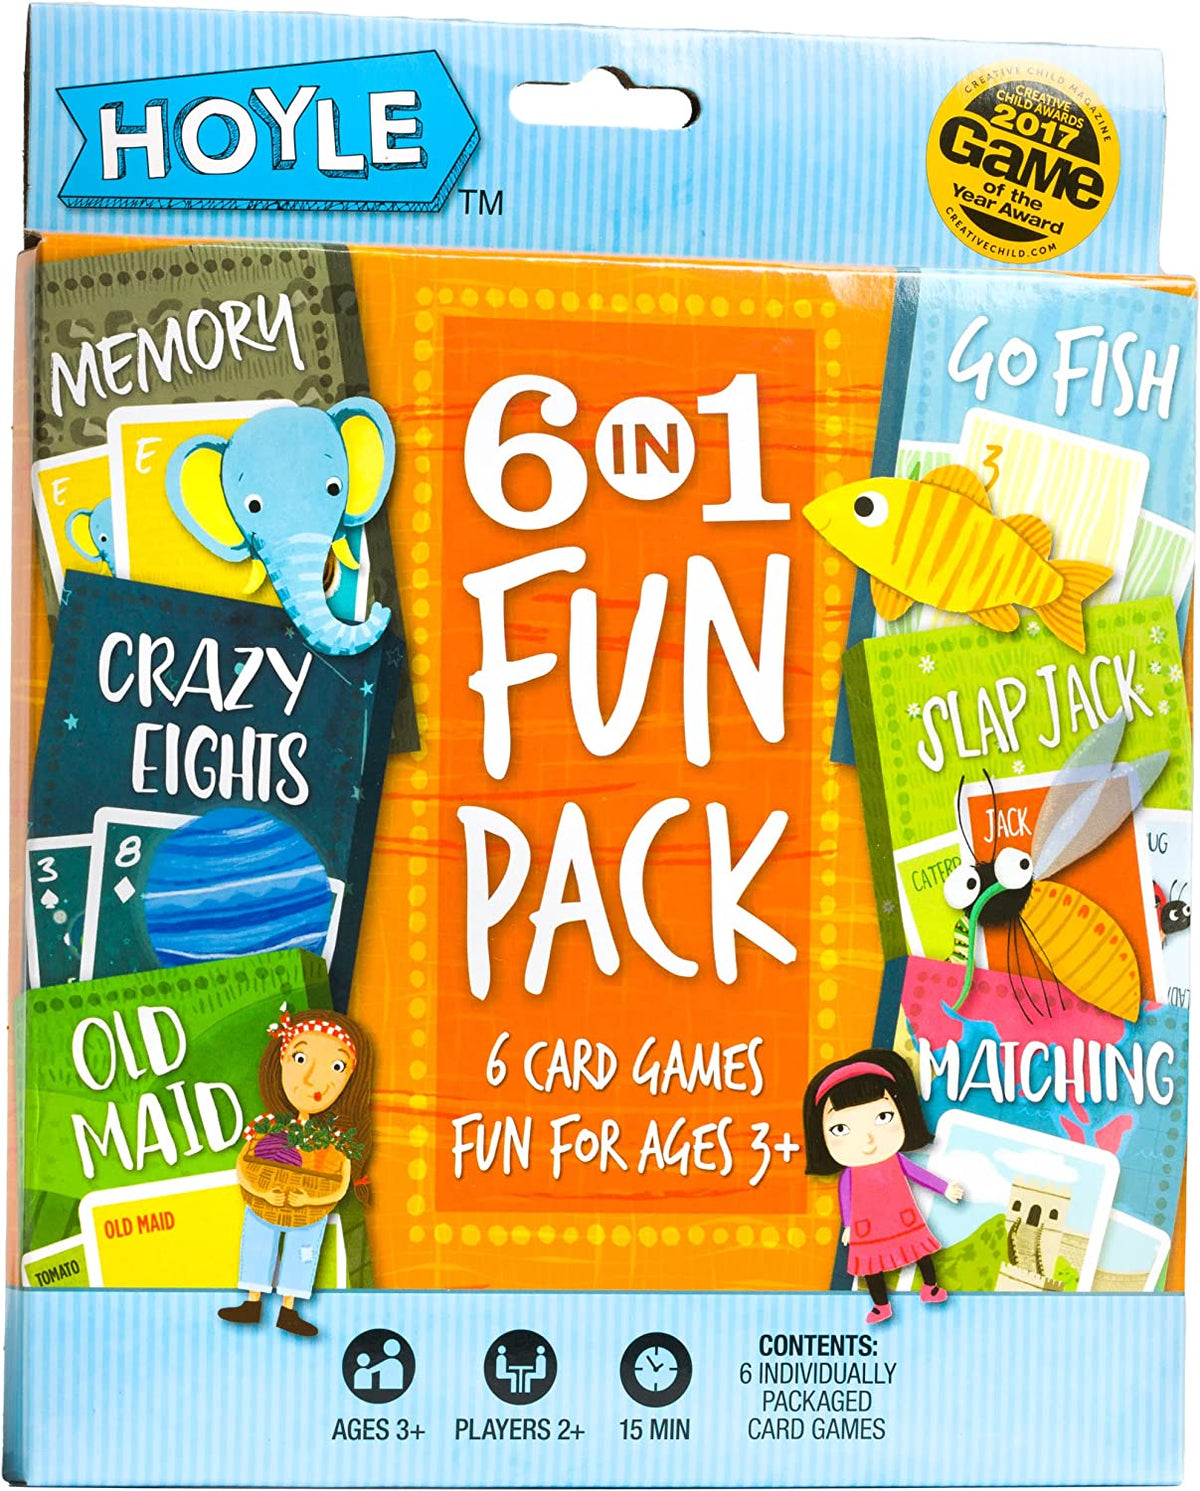 HOYLE 6 IN 1 FUN PACK CARD GAMES